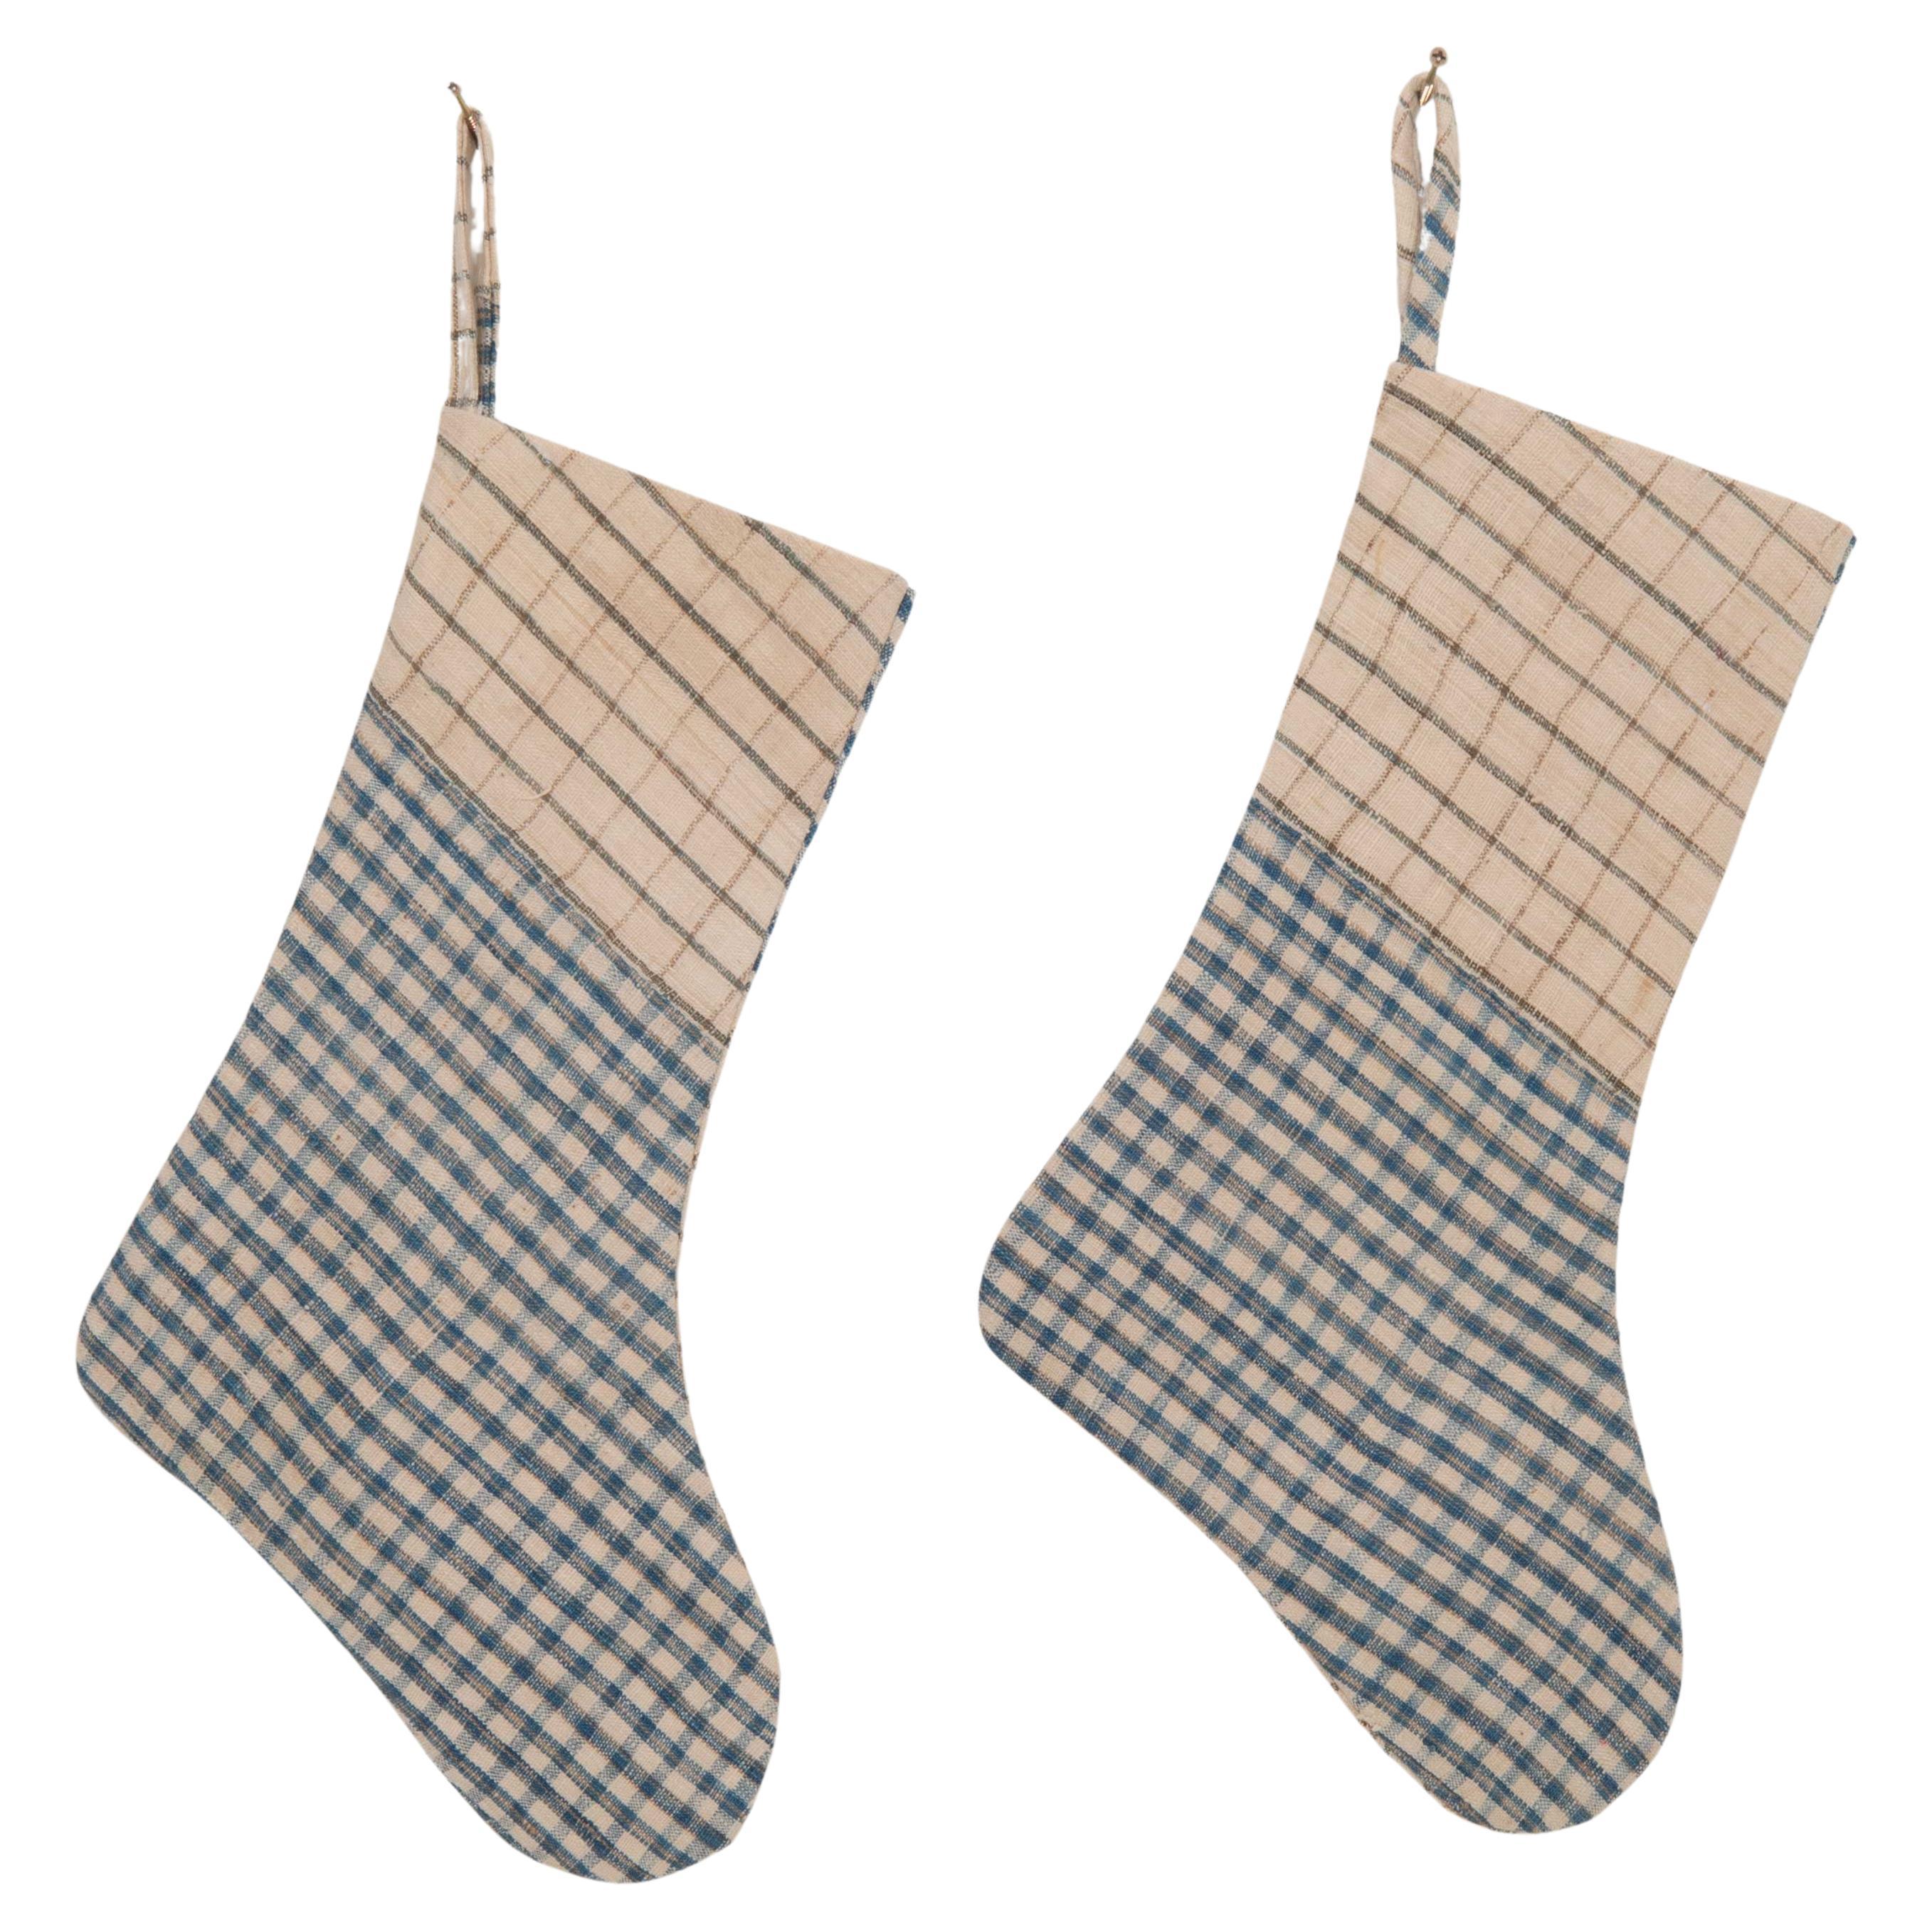 Double Sided Christmas Stockings Made from Anatolian Textile Fragments